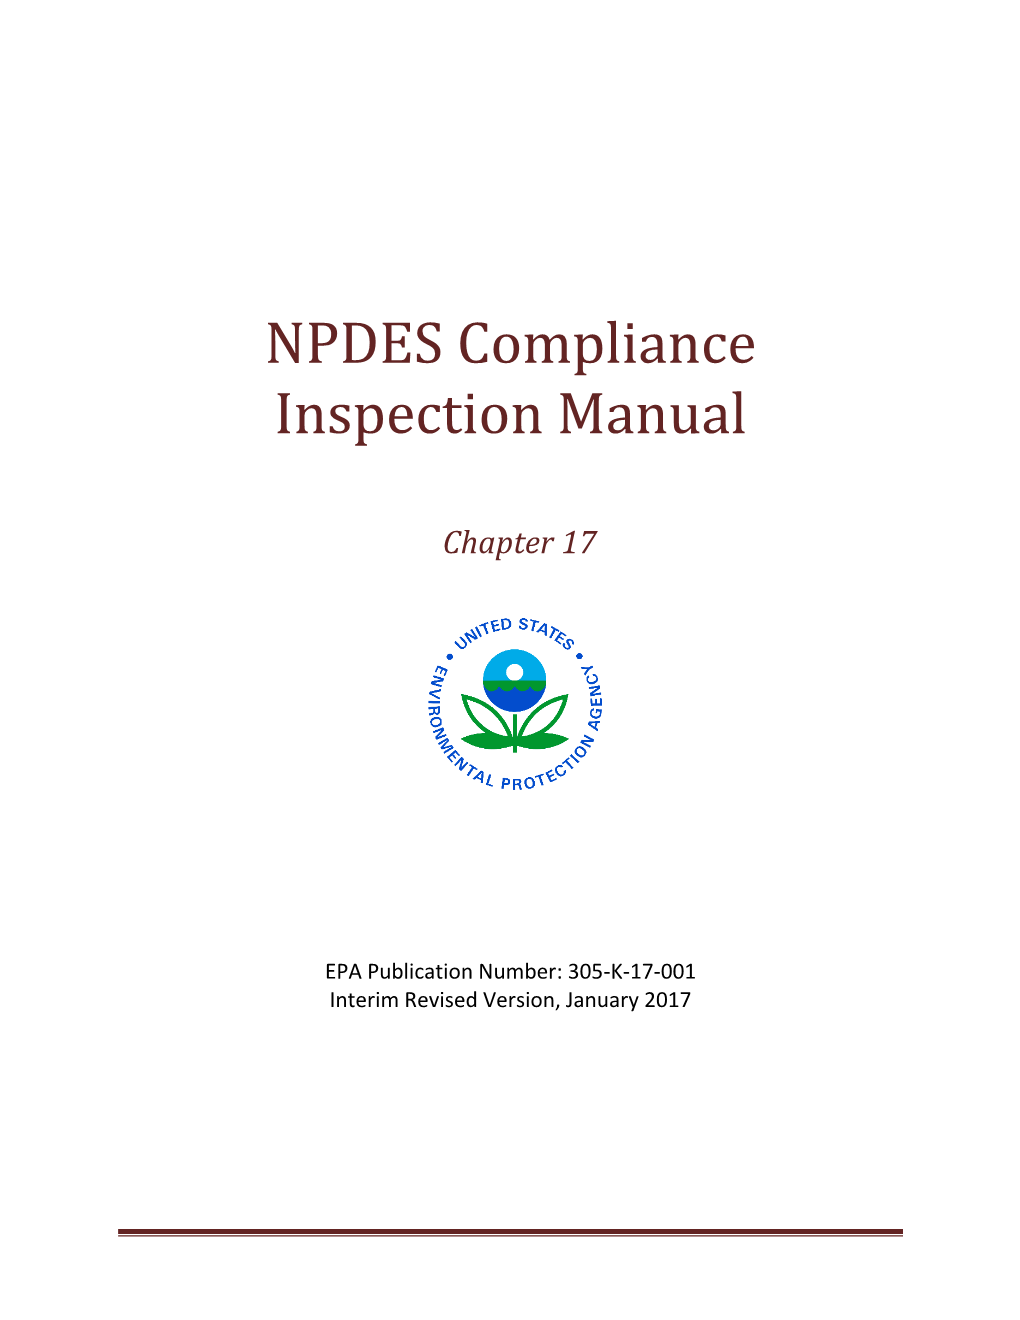 (NPDES) Compliance Inspection Manual